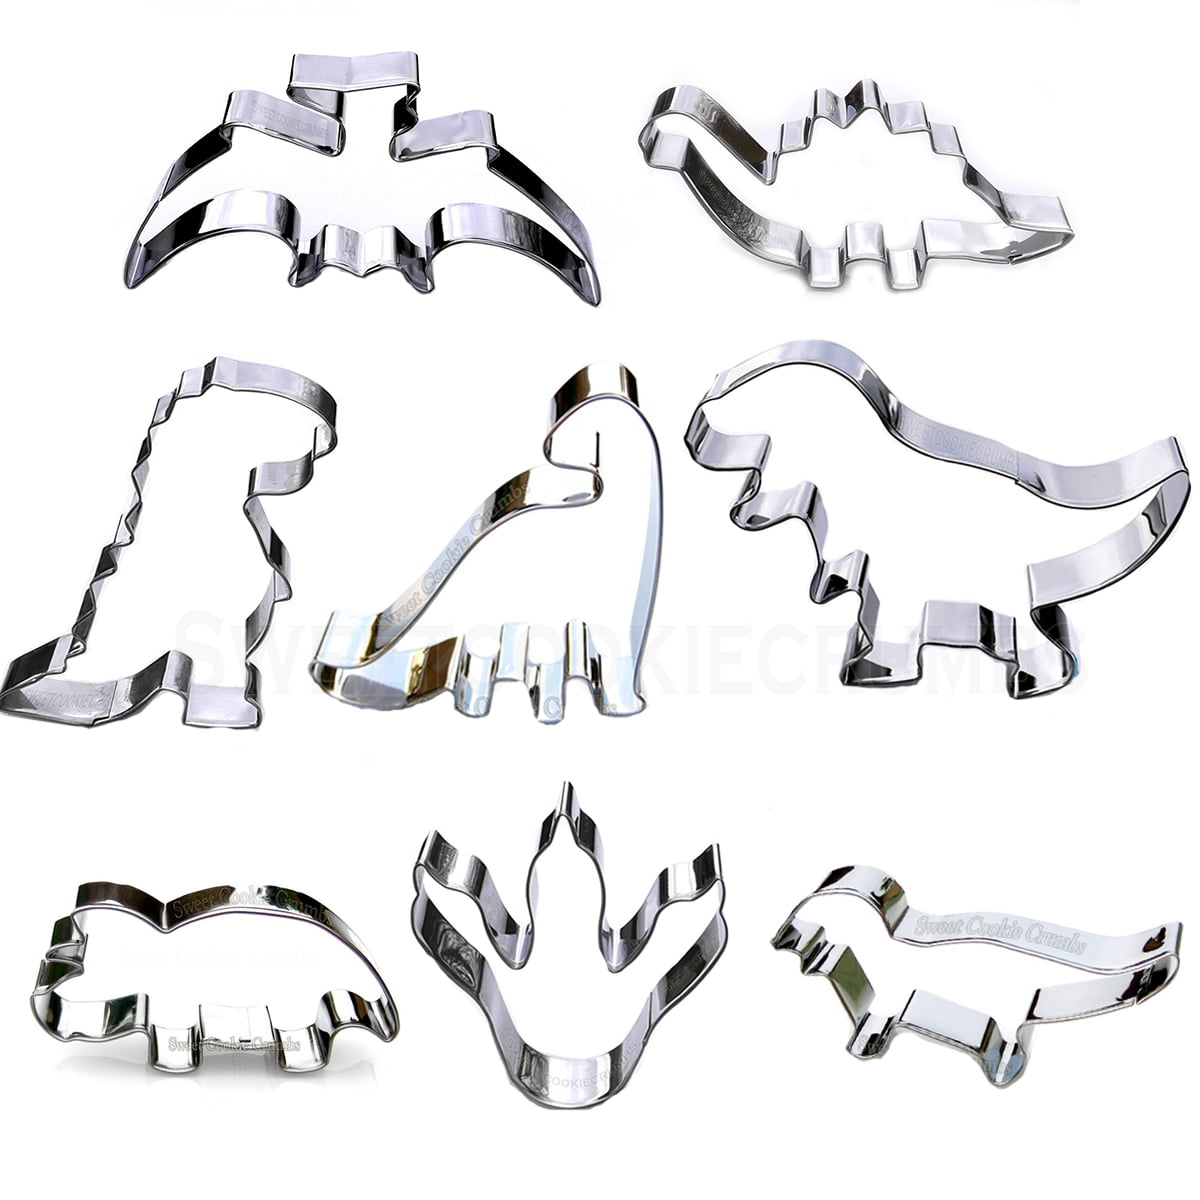 Dinosaur Cookie Cutters 11 Piece Large Dino Biscuit Cutters Dinosaur Stainless Steel Cutters for Kids Dinosaur Party Decorations